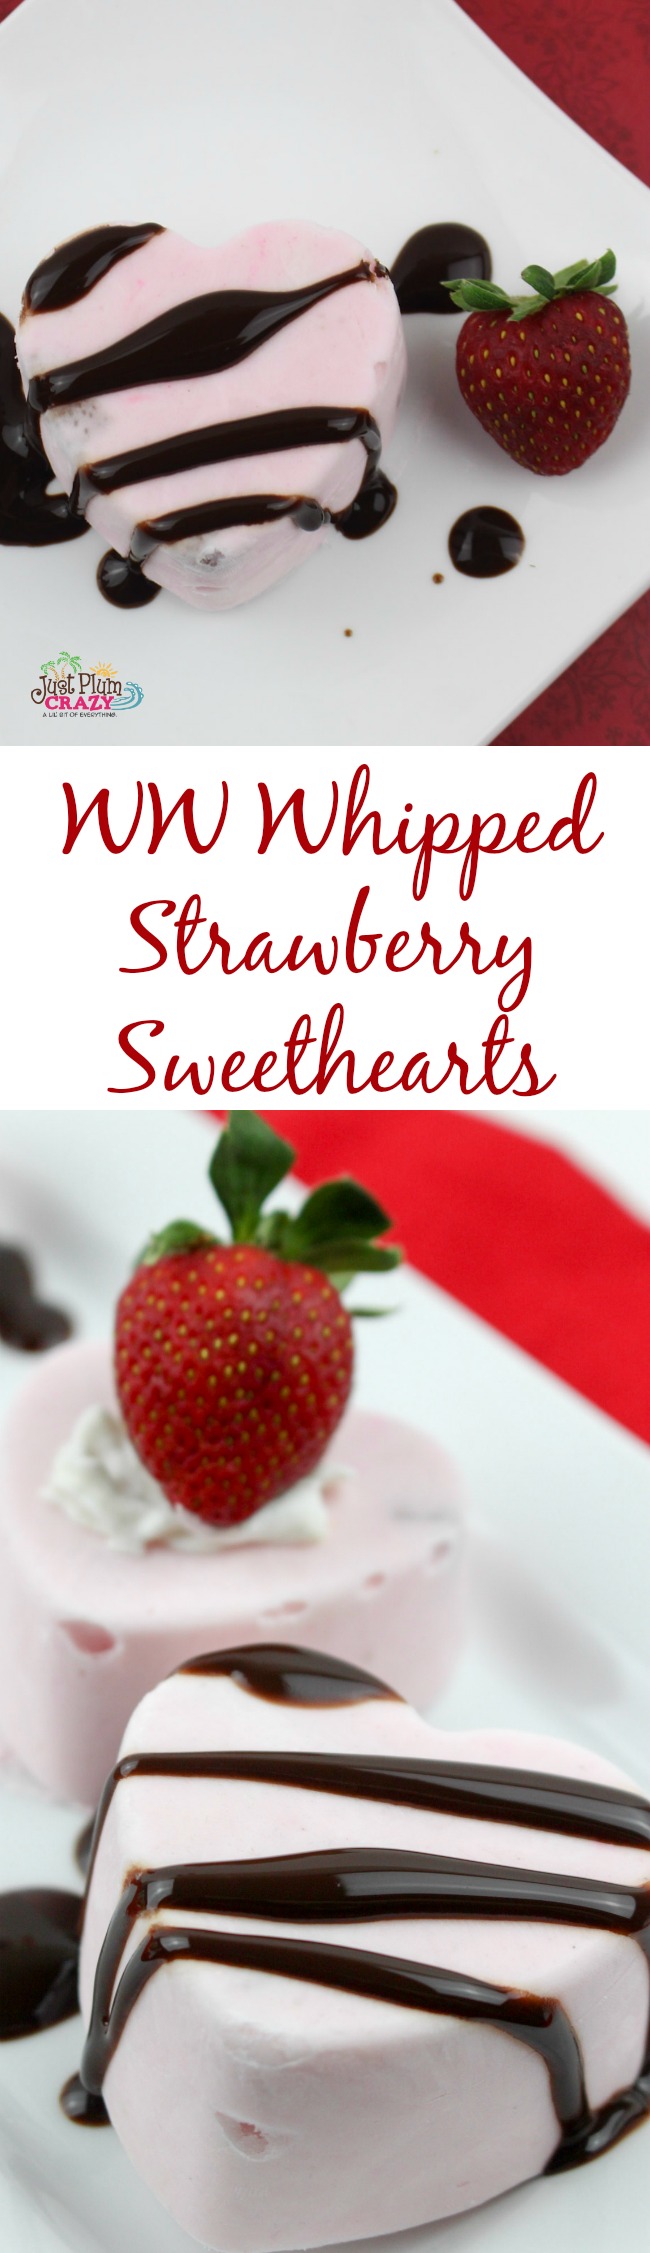 With Valentine's Day upon us, what better way to celebrate than with the Whipped Strawberry Sweethearts Recipe and still stick to your Weight Watchers plan.